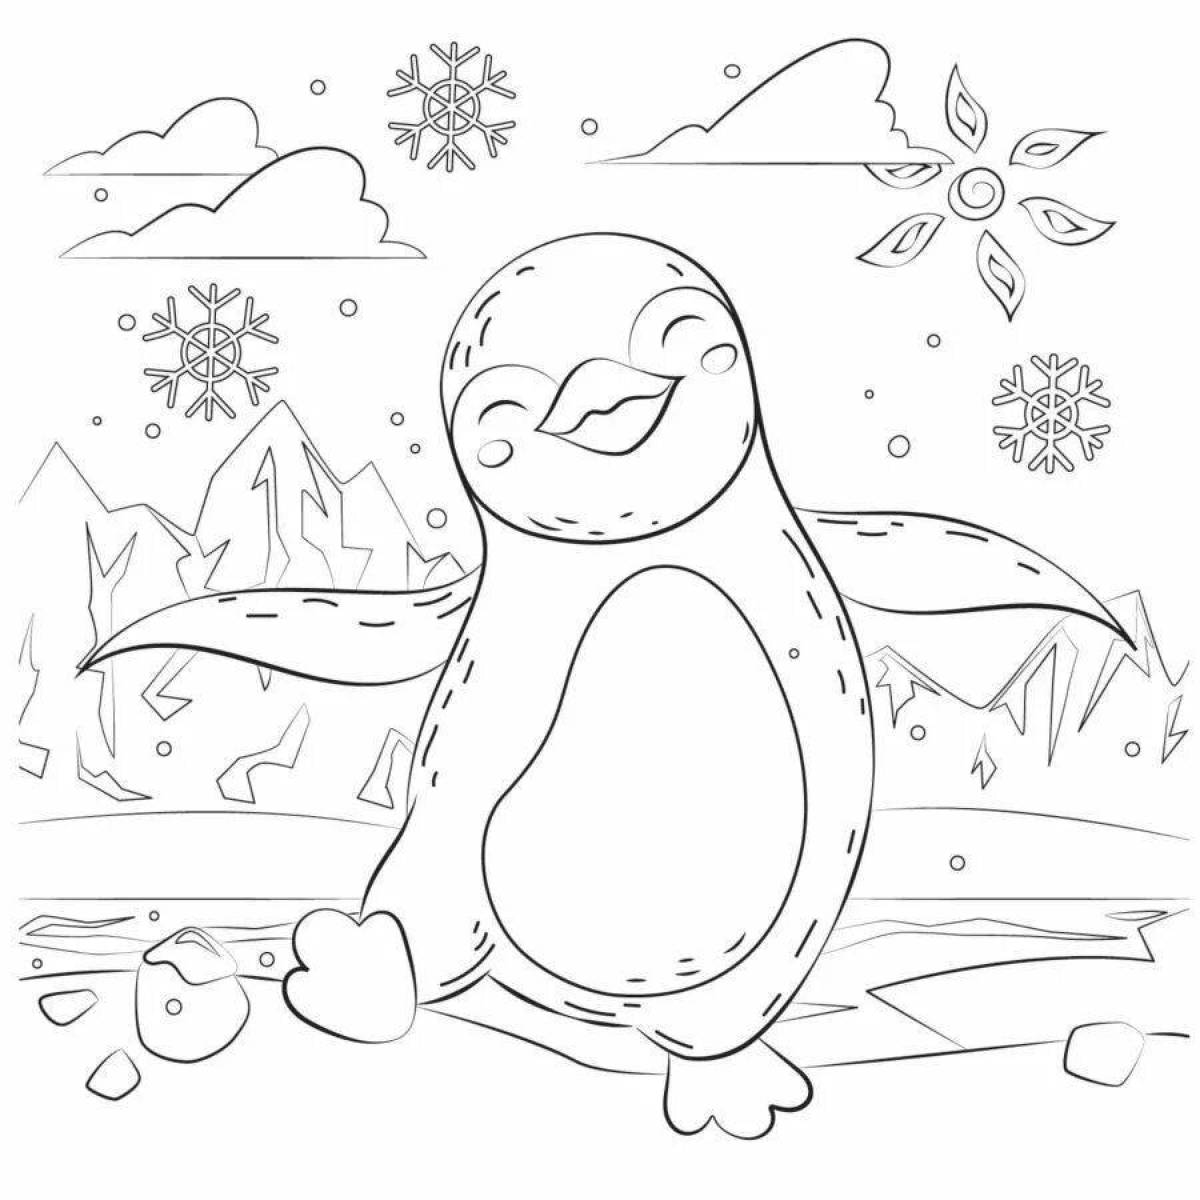 Gorgeous penguin on an ice floe coloring pages for kids